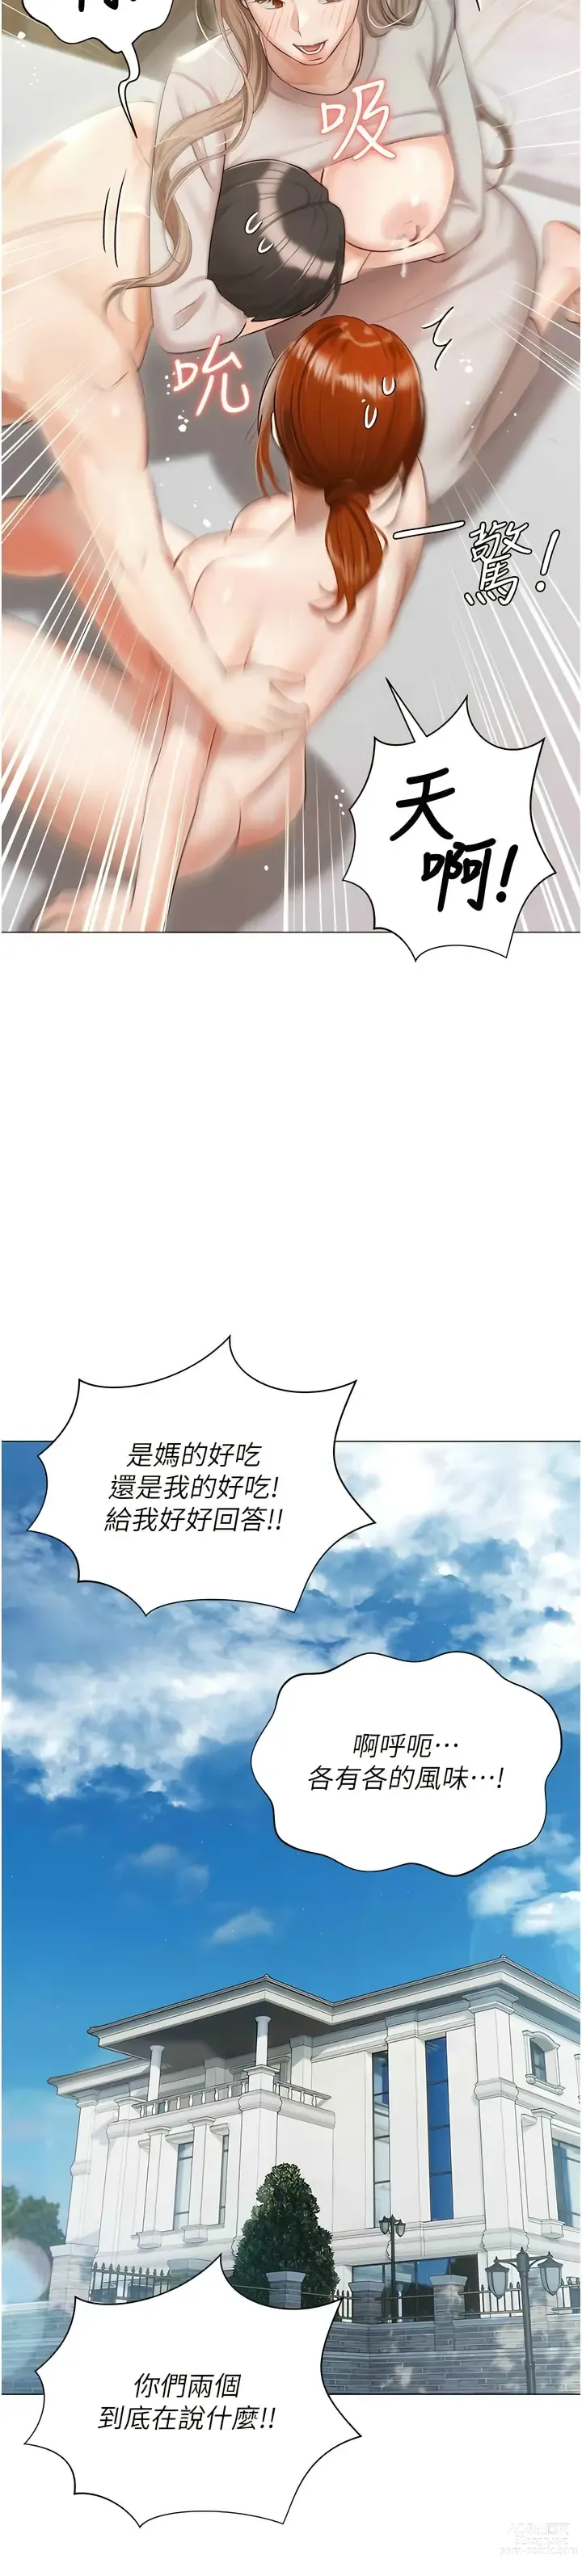 Page 1980 of manga 私宅女主人／Hyeonjung’s Residence